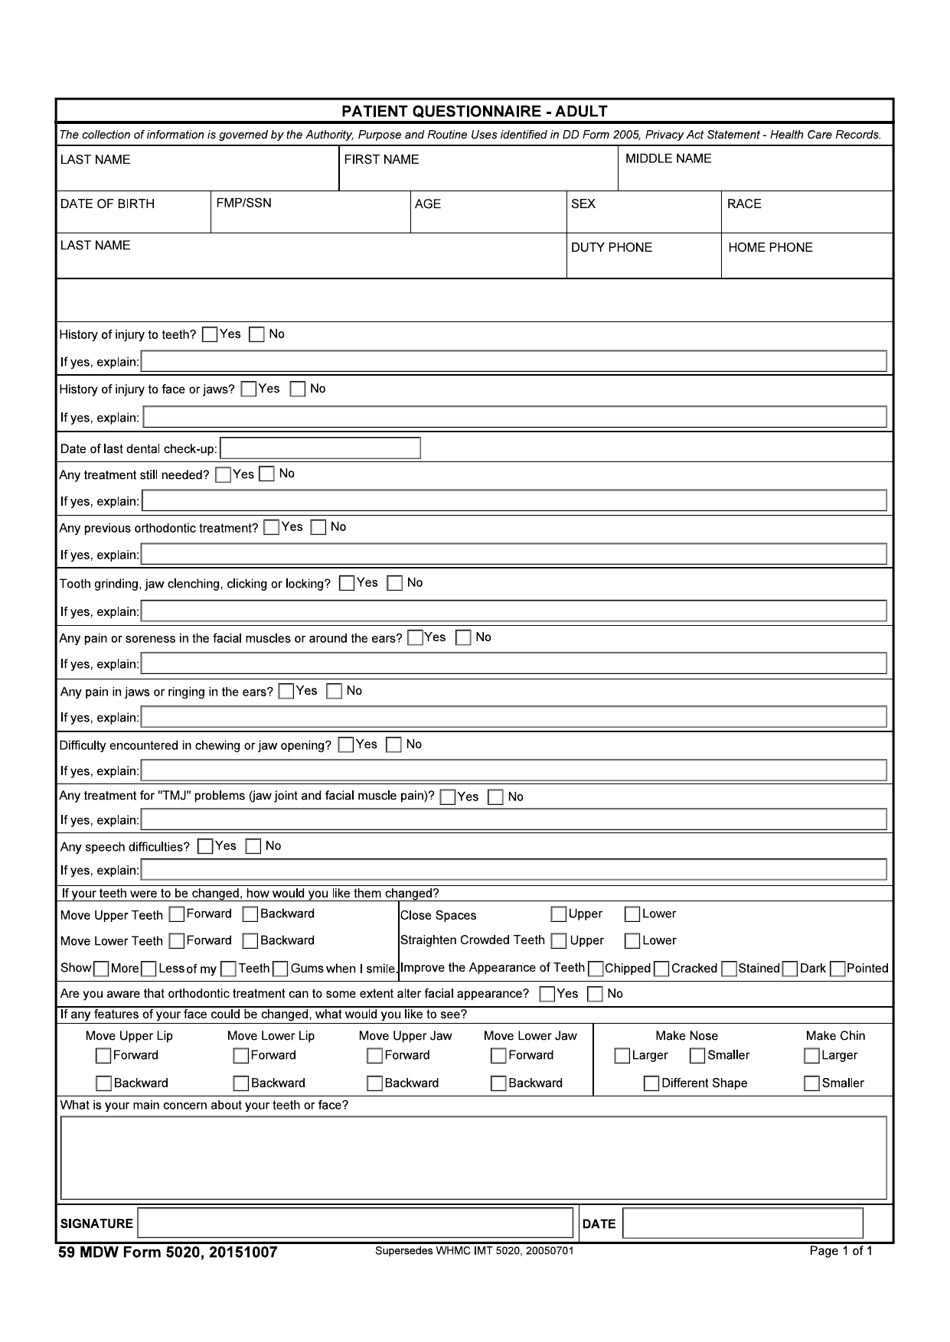 59 MDW Form 5020 Patient Questionnaire - Adult, Page 1